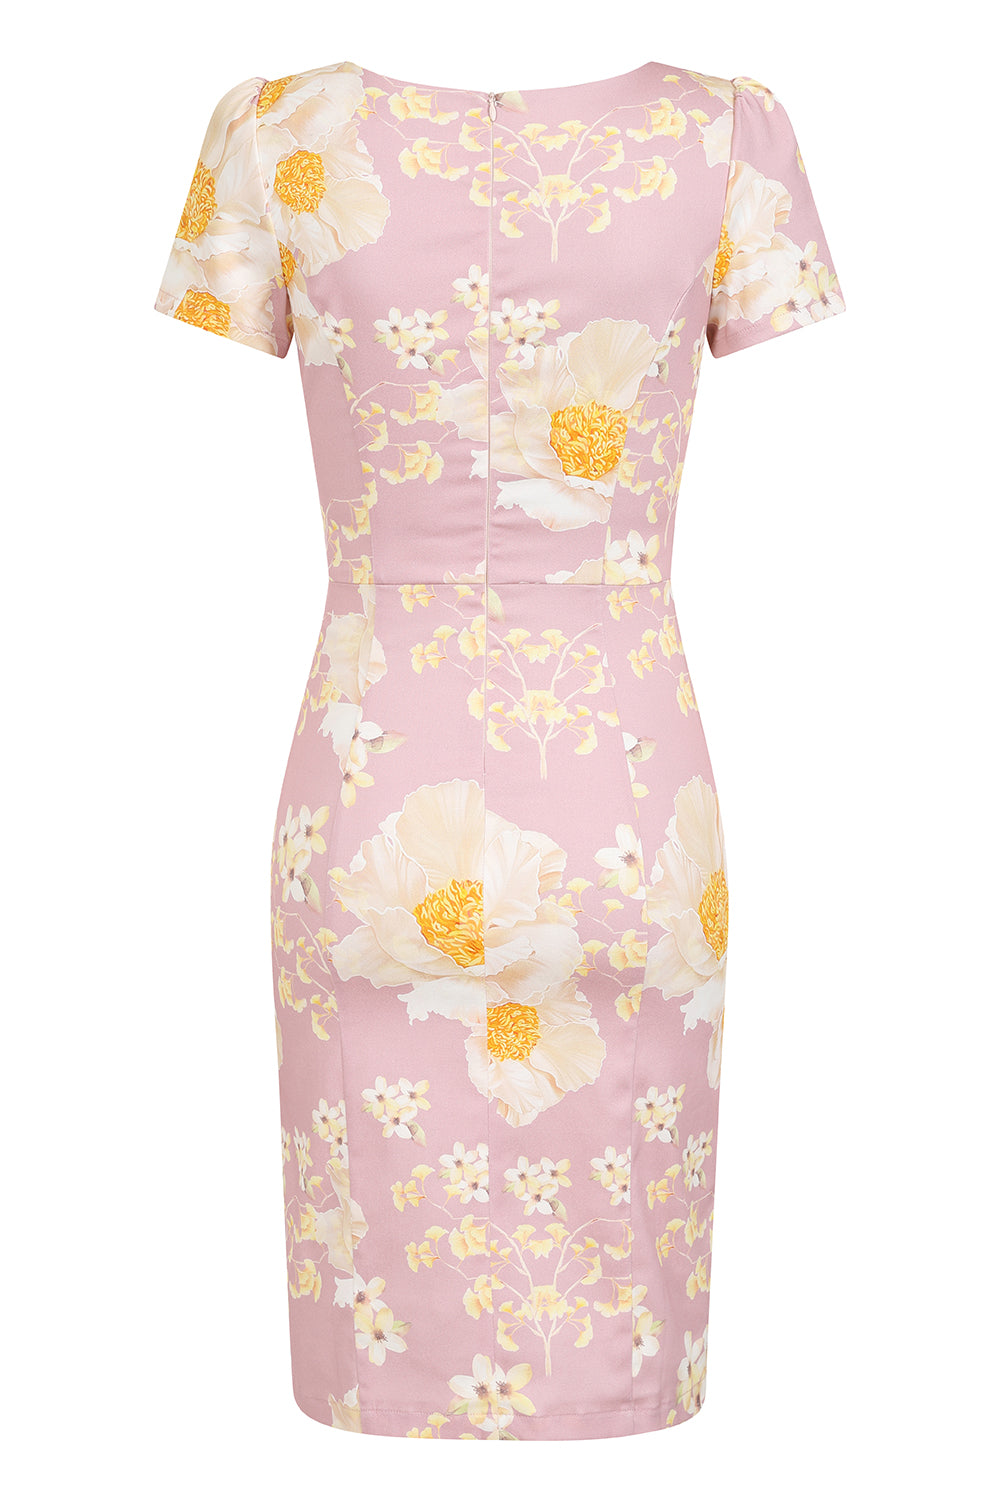 H&R London Remi Floral Wiggle Dress With Short Sleeves